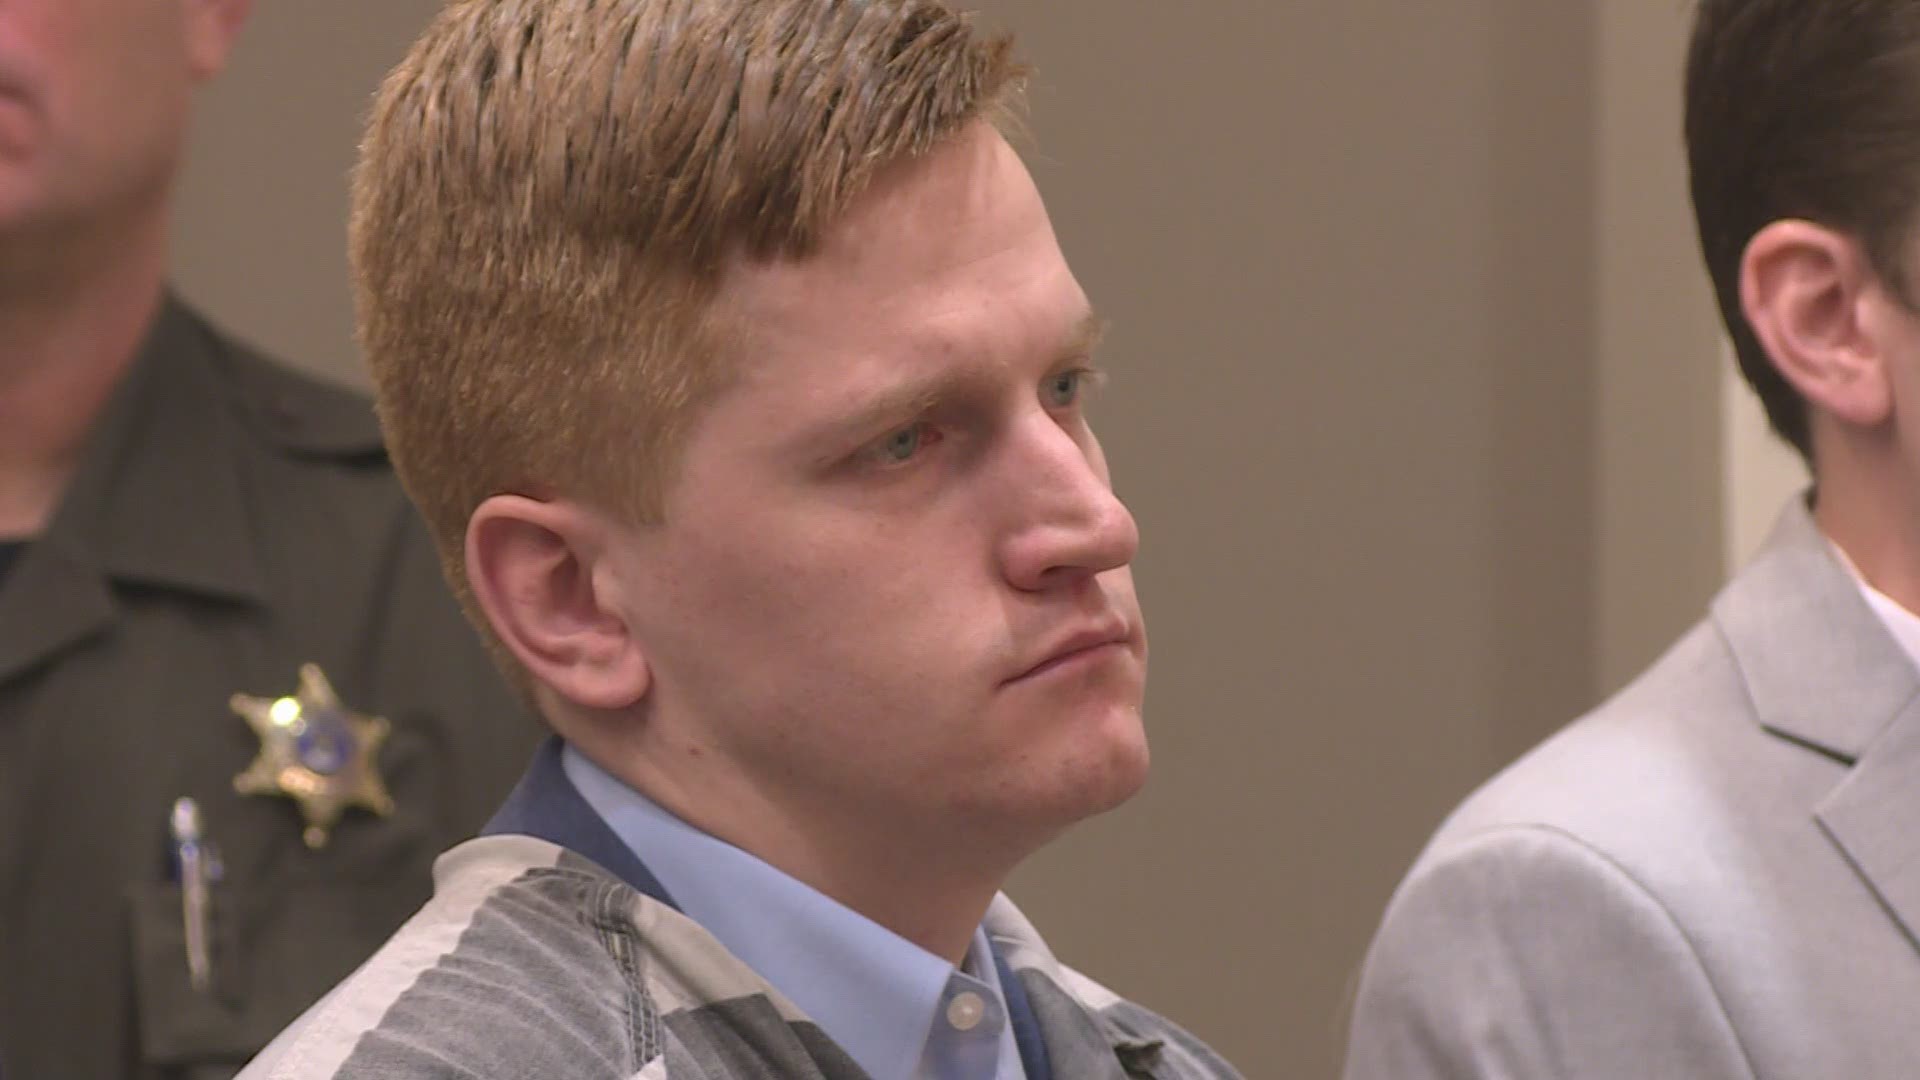 A judge sentenced Jared Chance to serve between 100 and 200 years for the murder of Ashley Young, whose partial remains were found in a Grand Rapids home.